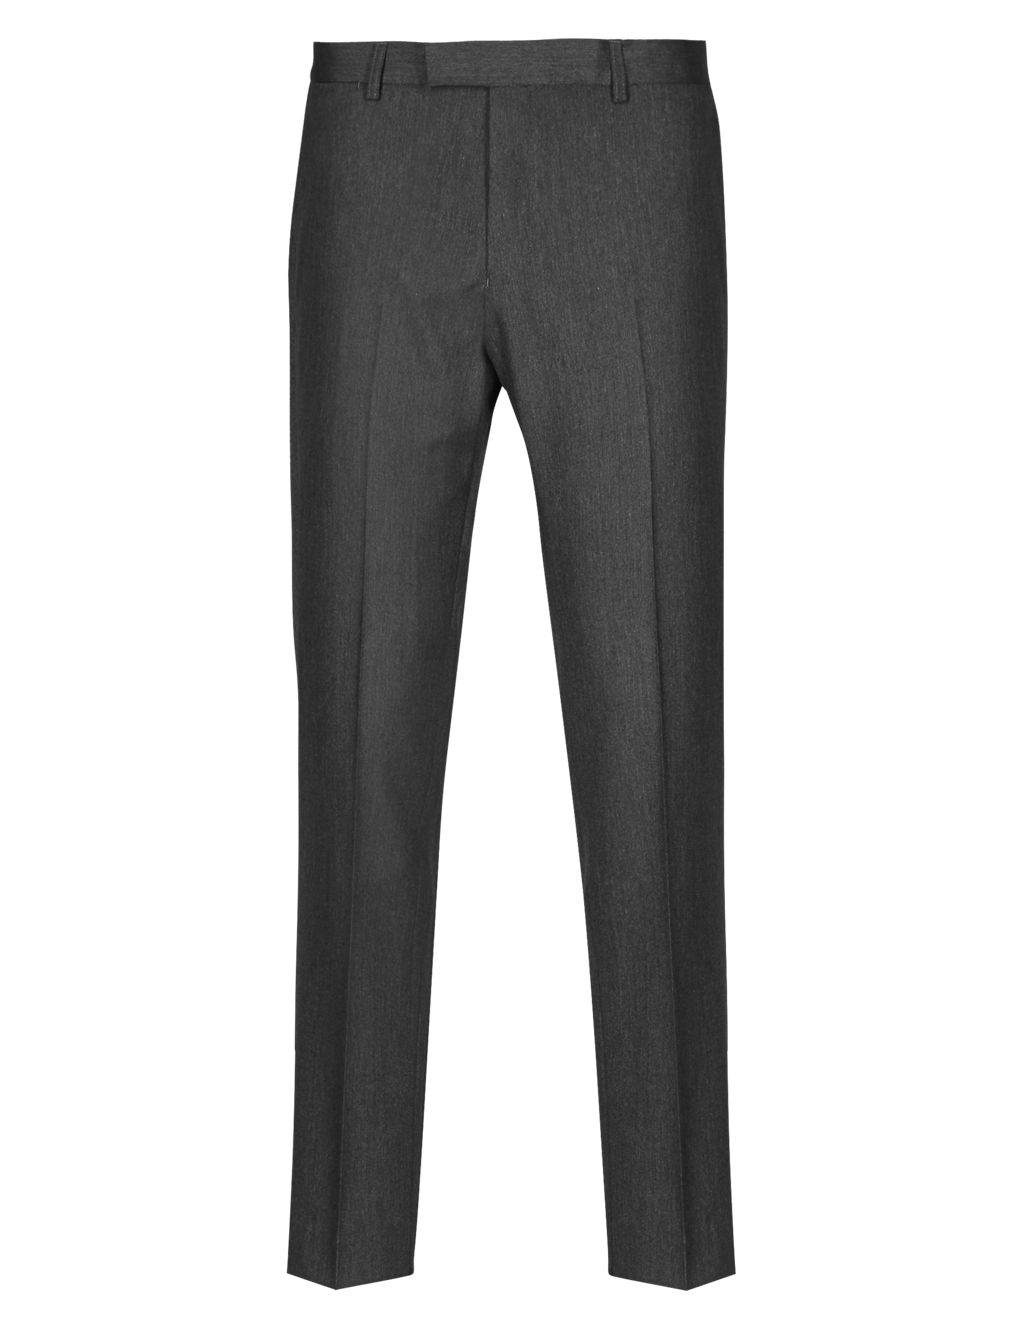 Charcoal Superslim Fit Trousers 1 of 3